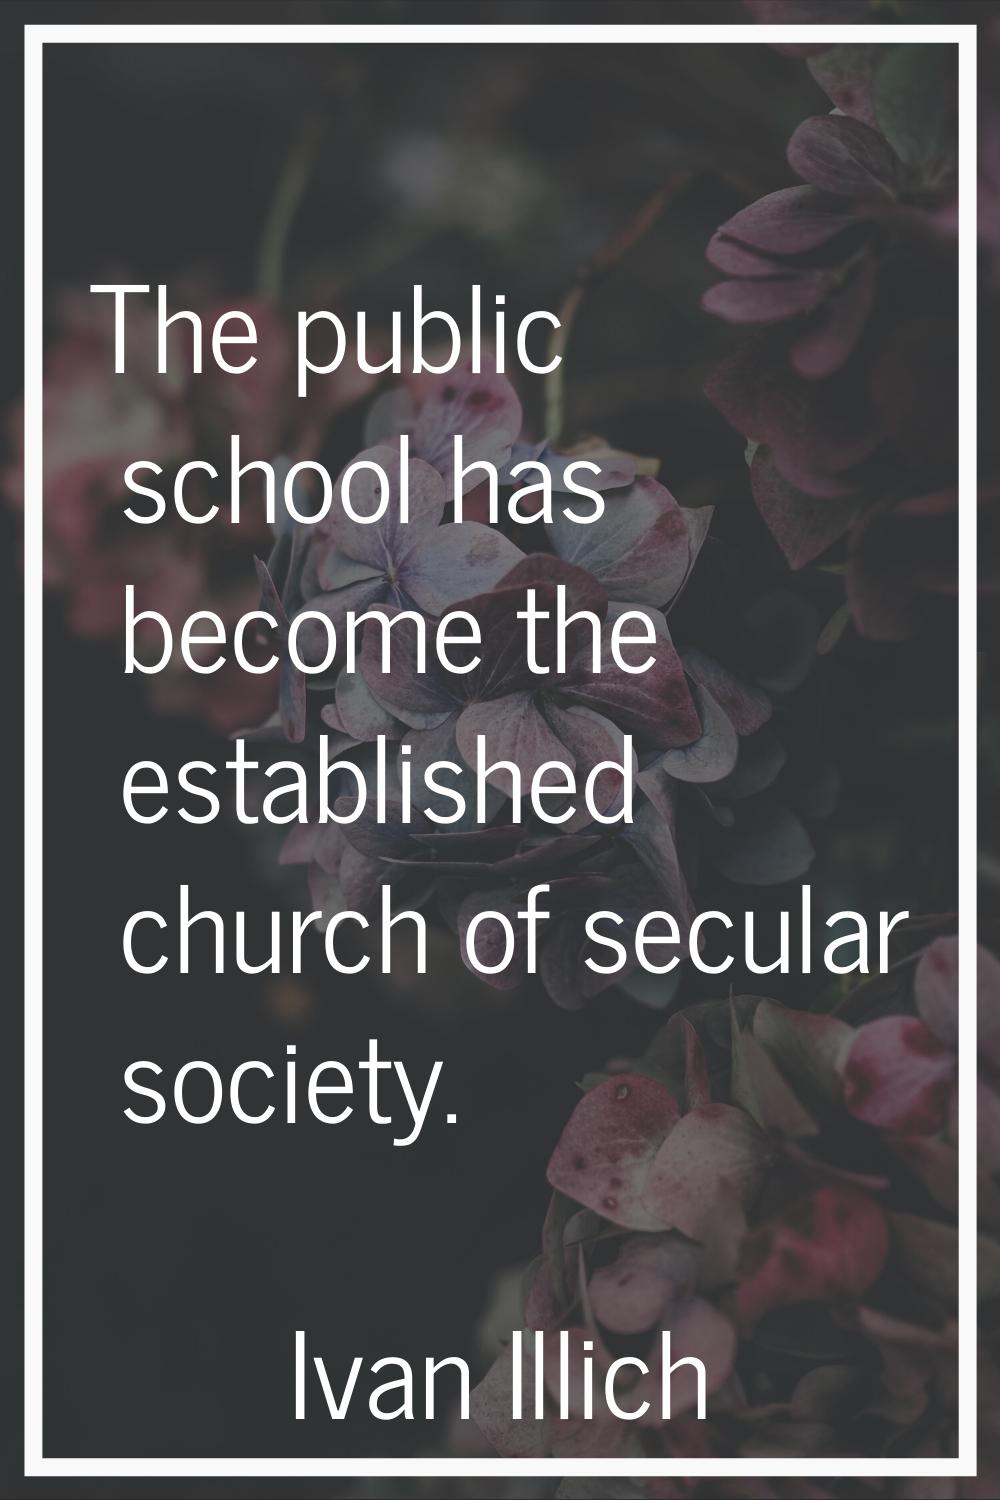 The public school has become the established church of secular society.